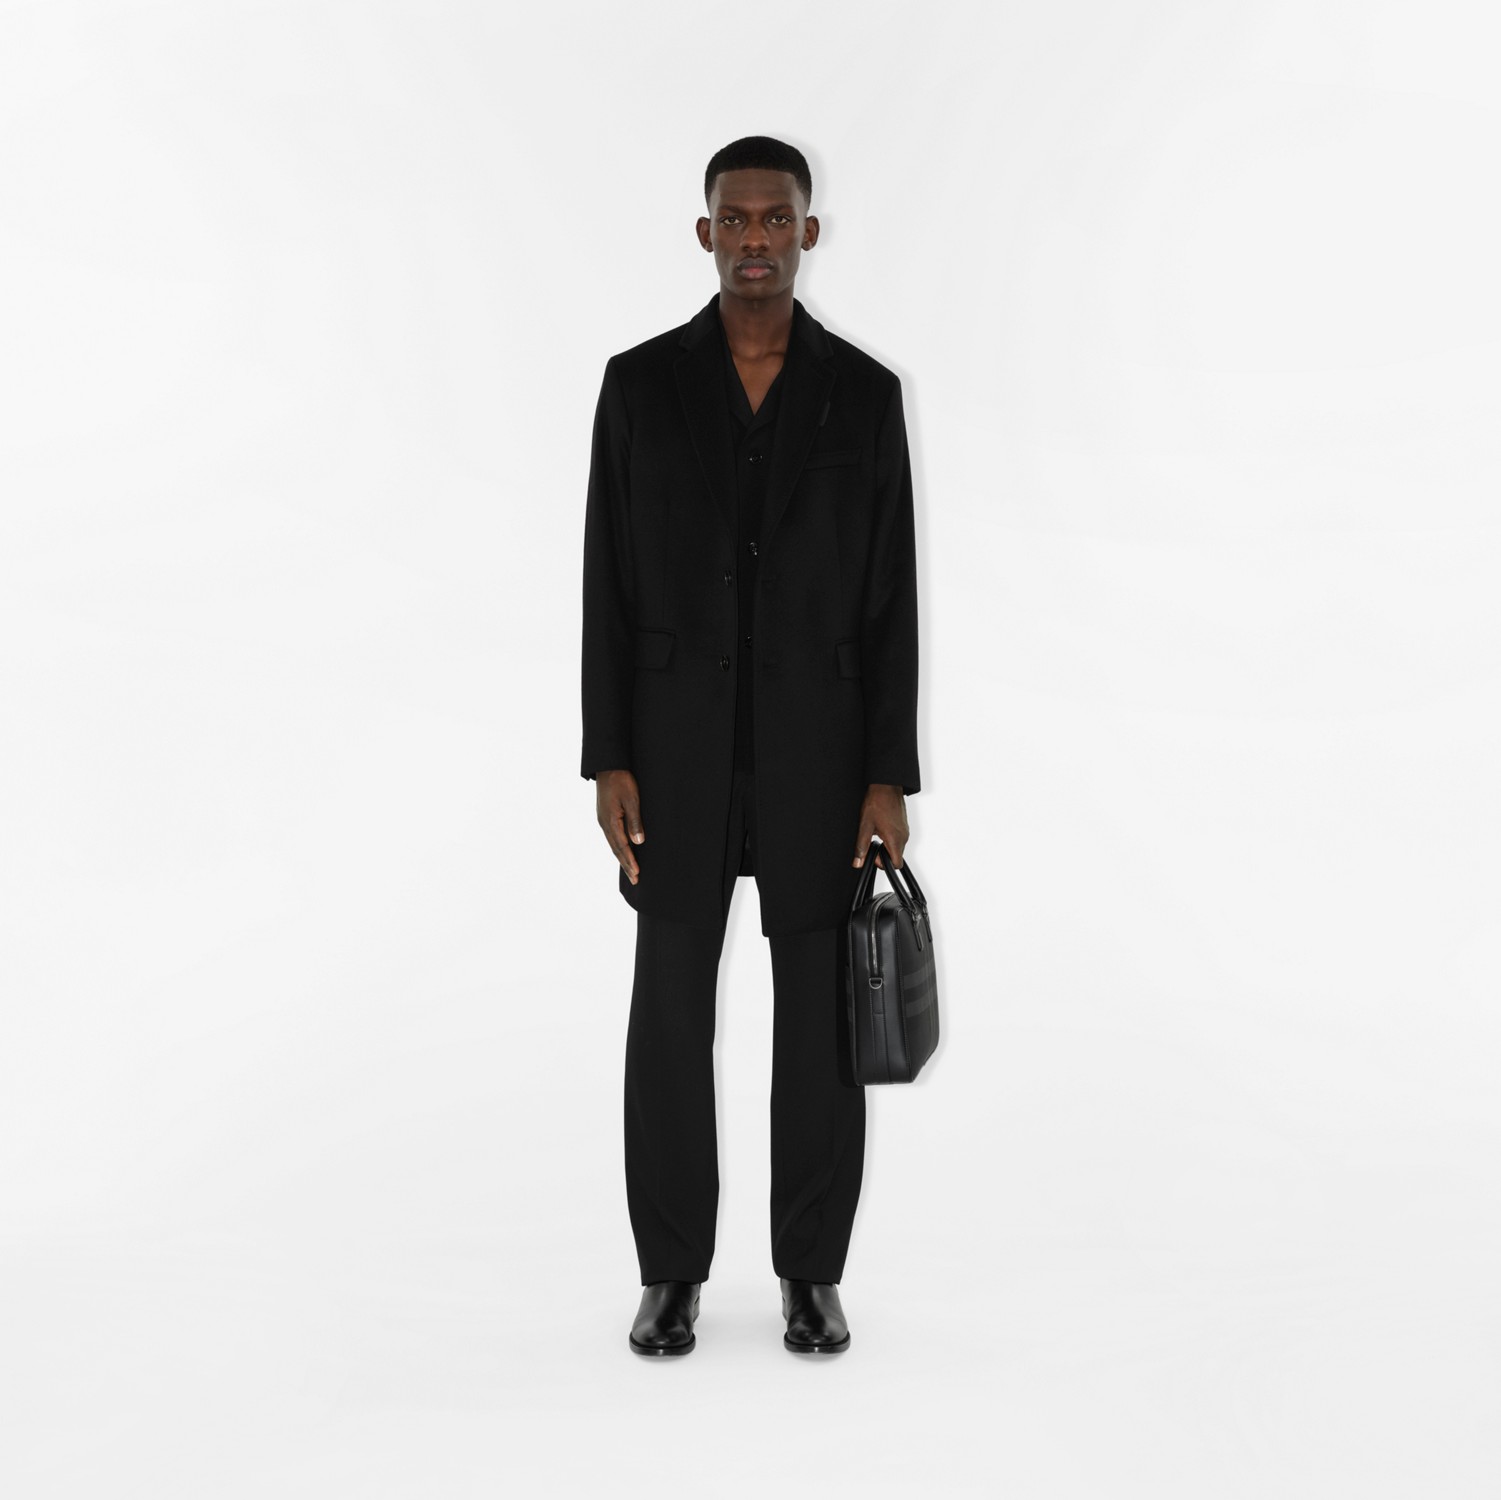 Wool Cashmere Tailored Coat